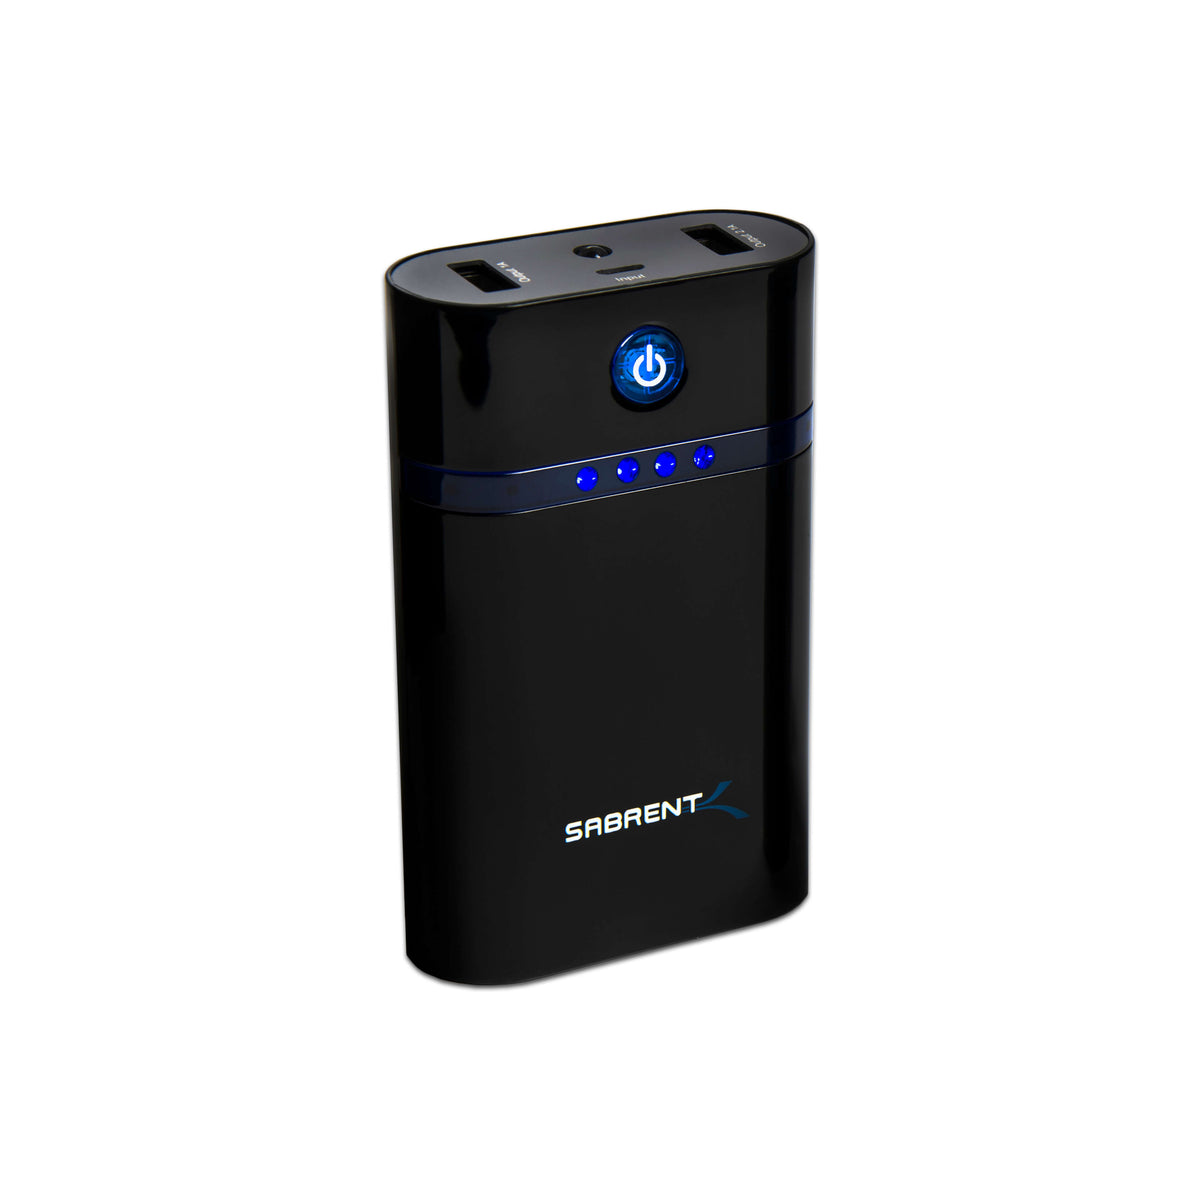 Portable Battery Charger - 6600mAh High Capacity Portable Charger